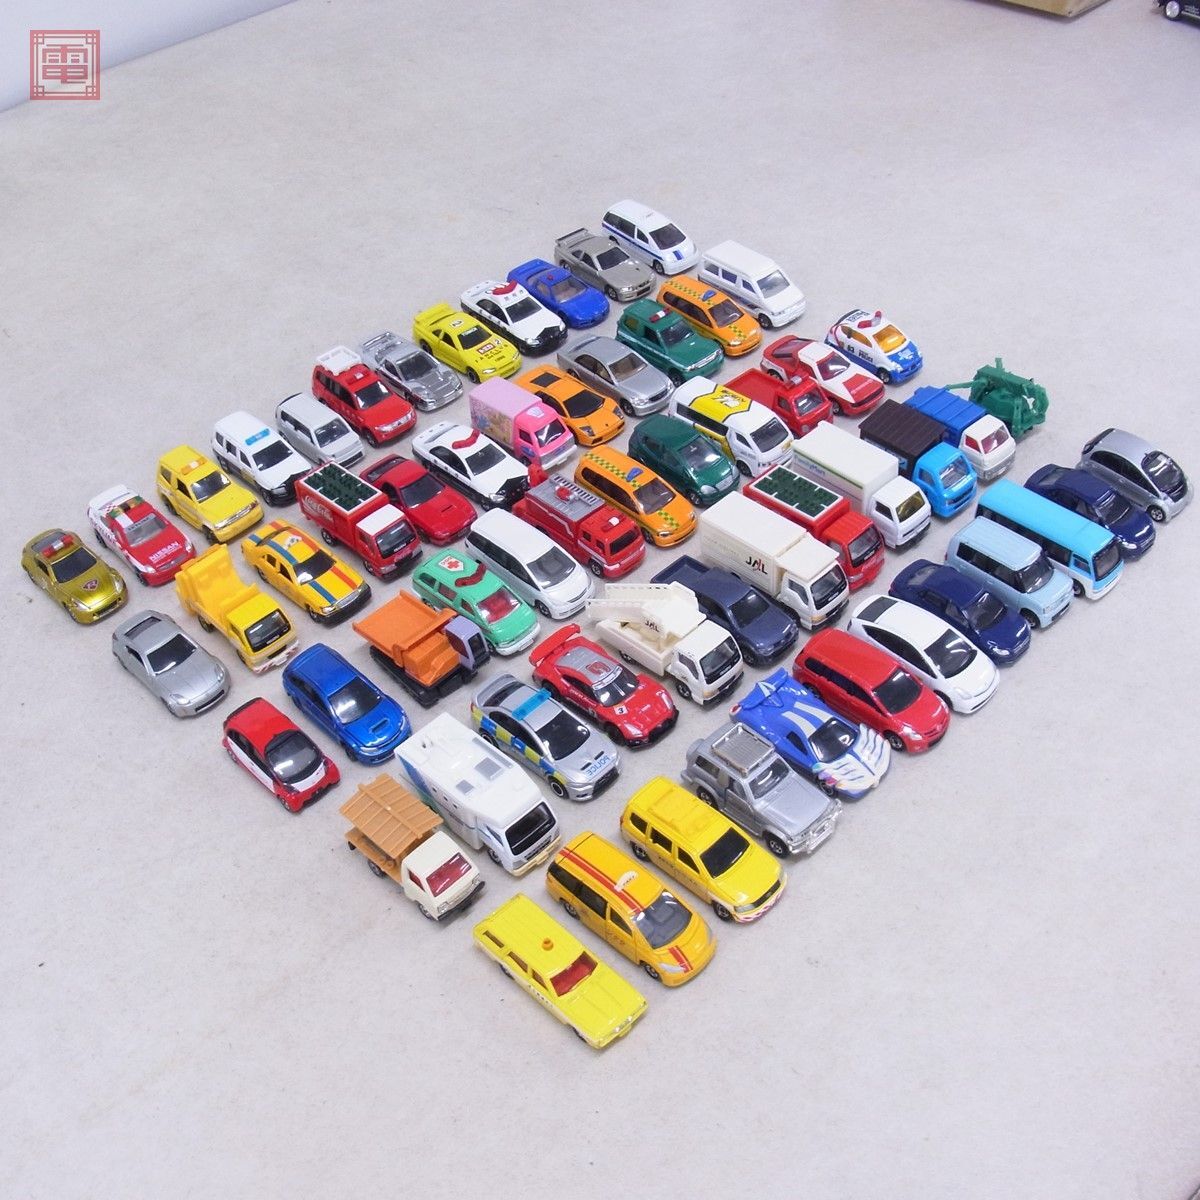  Tomica made in China Nissan Skyline GT-R R34/ Honda NSX/ Mitsubishi triton other together 60 pcs. set car body only TOMICA present condition goods [20